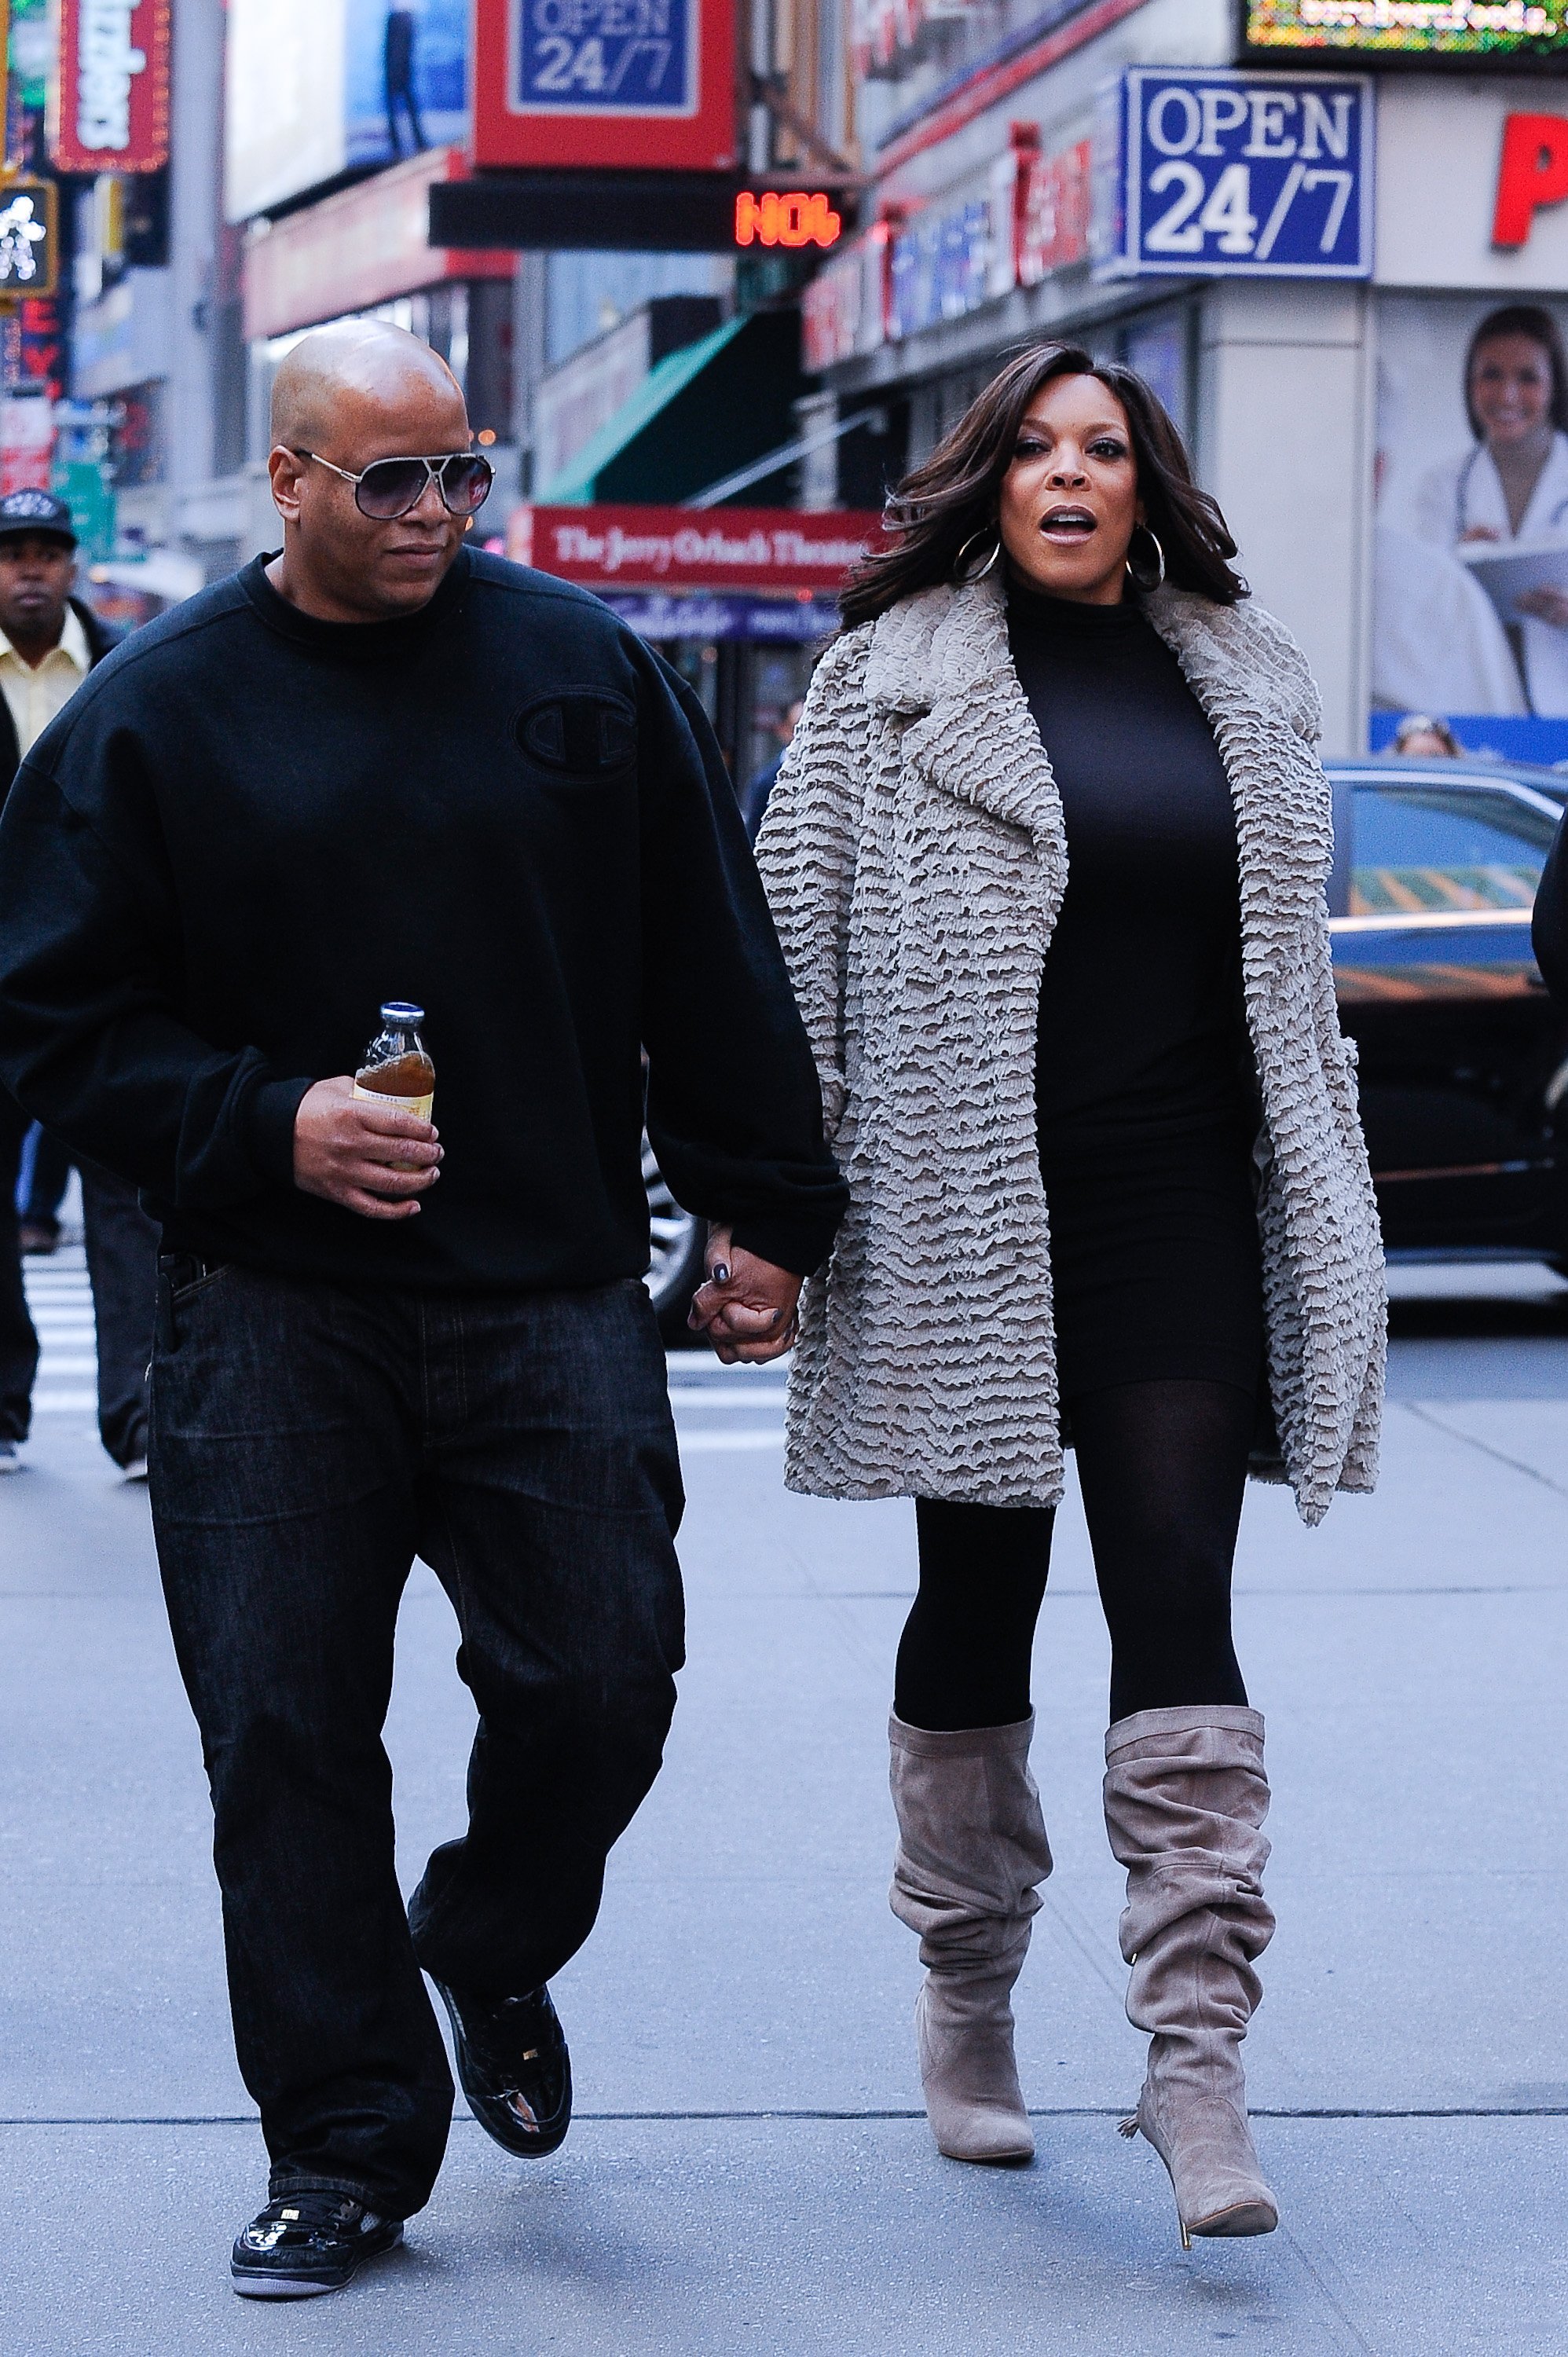 Wendy Williams and Kevin Hunter leaving the "Celebrity Aprentice" film set back in October 2010. If rumours of his affair are to be believed, Kevin was already seeing his alleged mistress, Sharina Hudson then. | Source: Getty